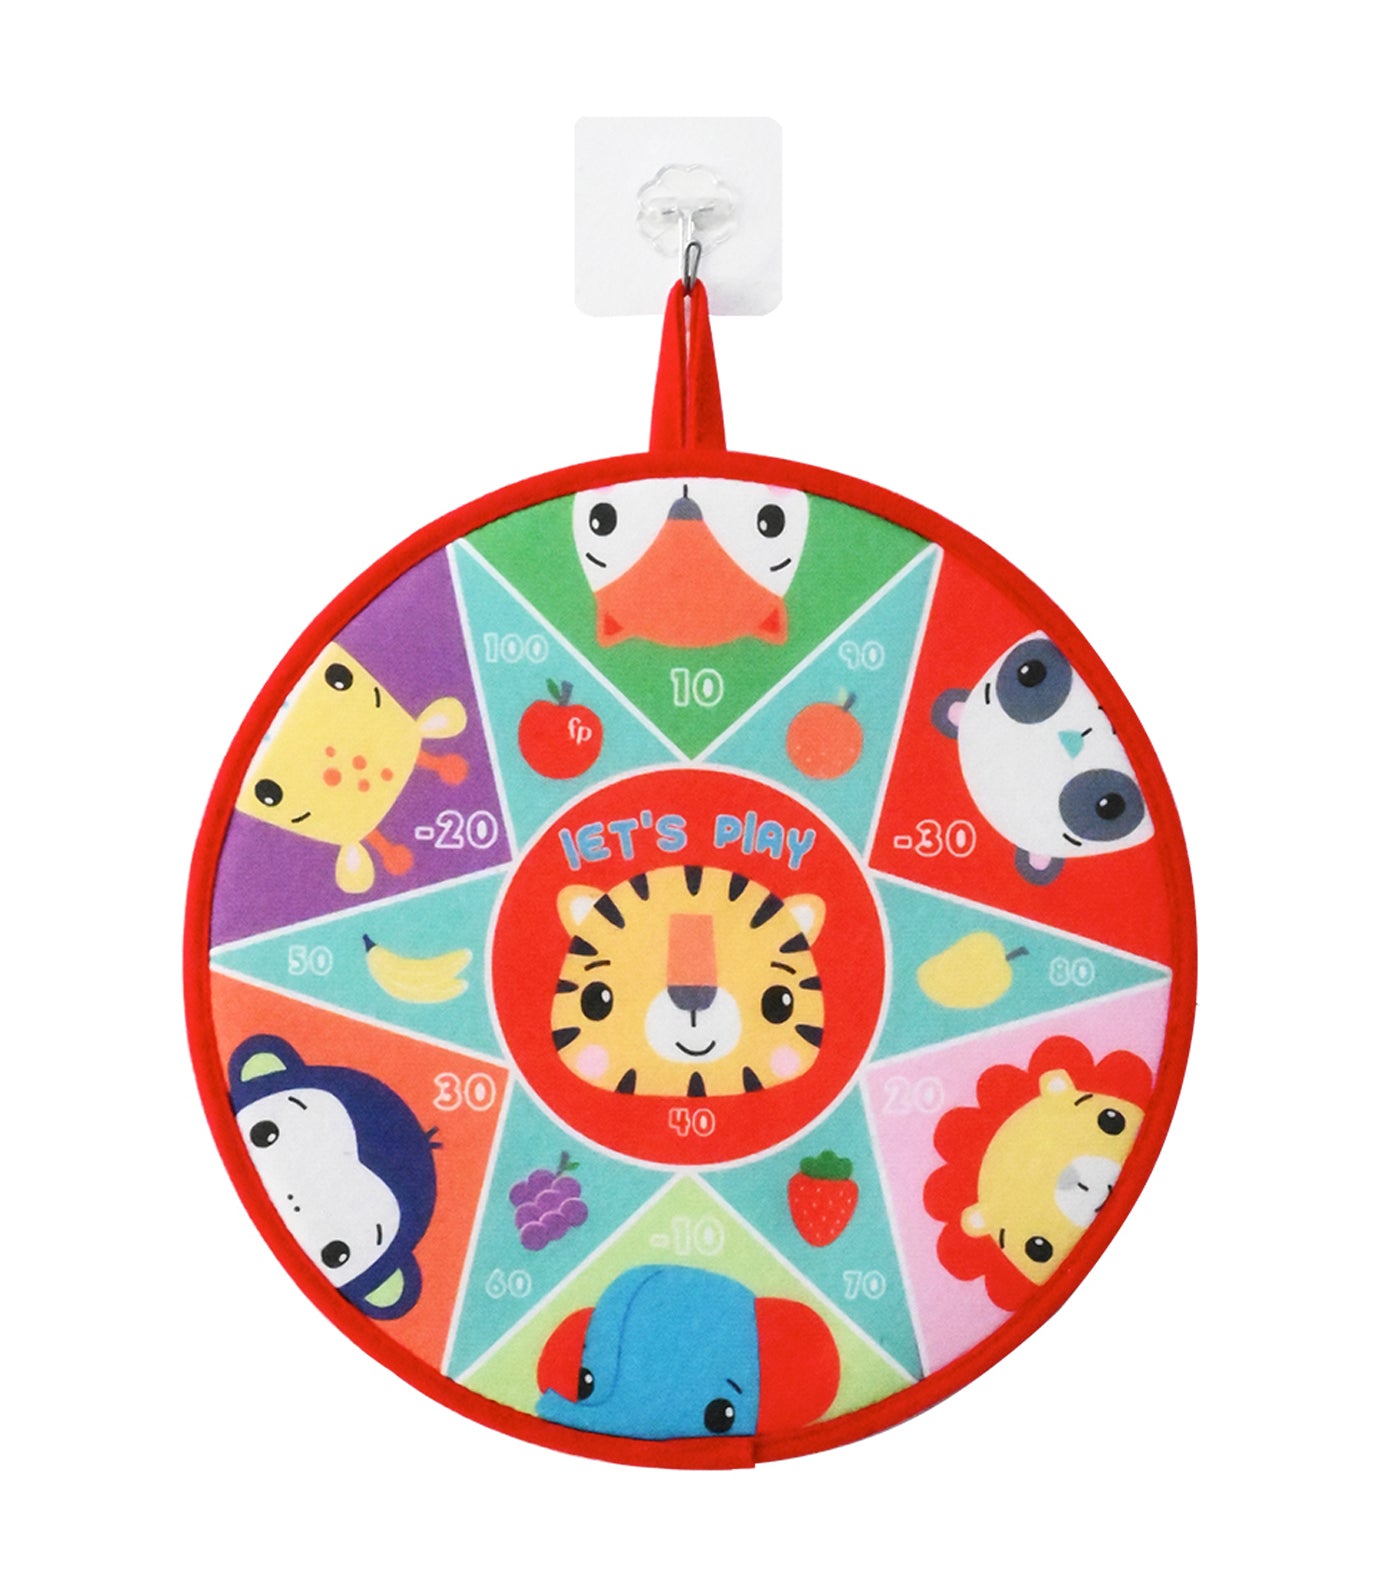 Fisher-Price Dartboard Game Playset - Outdoor